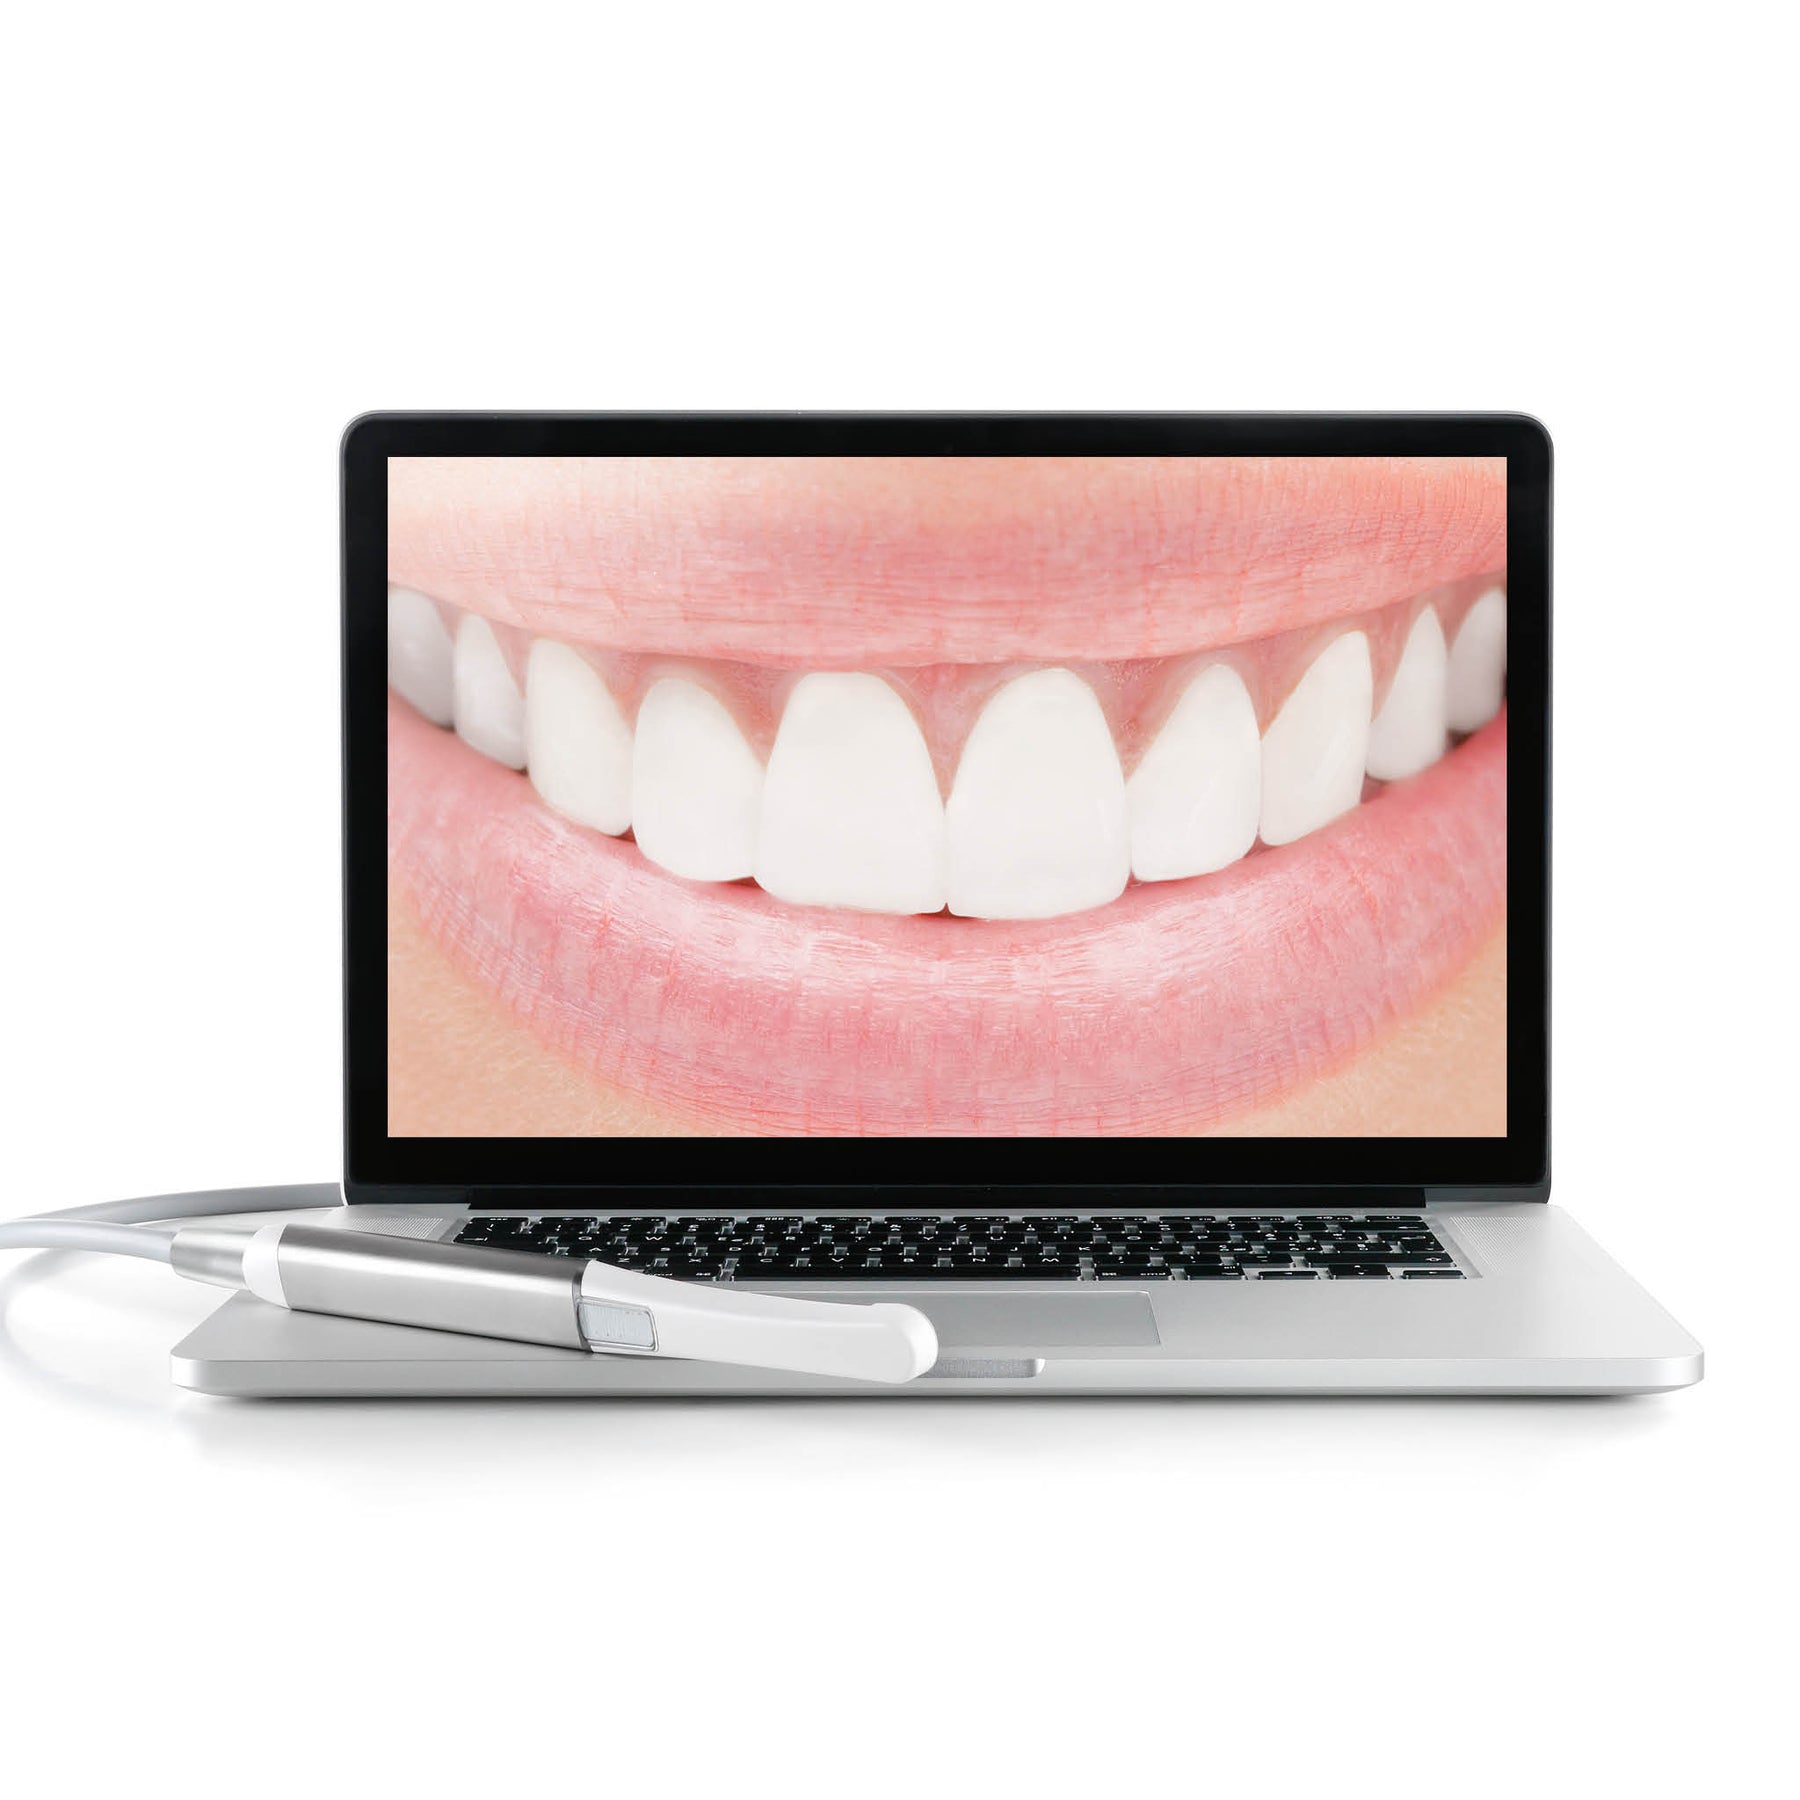 MyRay C-U2 Intraoral Camera with laptop and image on screen